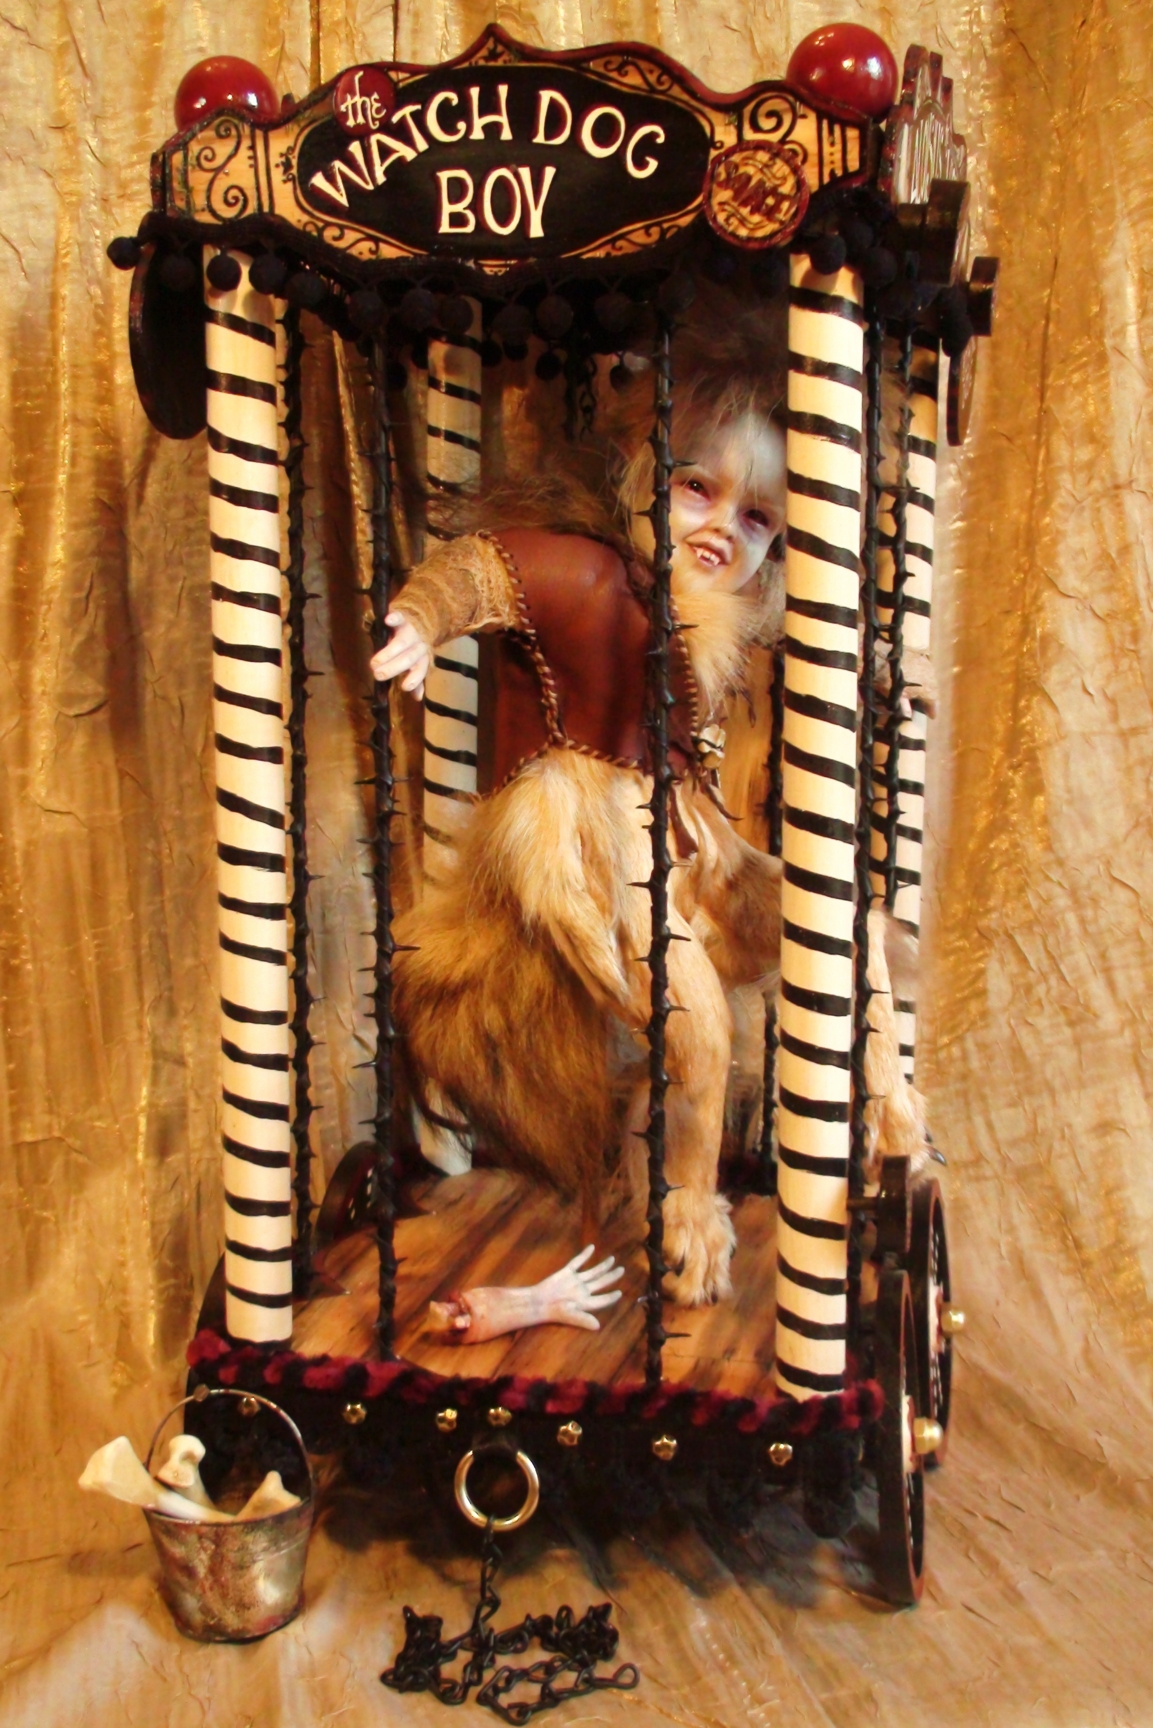 side view artdoll of a watchdog boy wolf boy sideshow attraction taxidermy assemblage in a cage carnival cart pull toy with hand painted signs and wheels bucket of bones